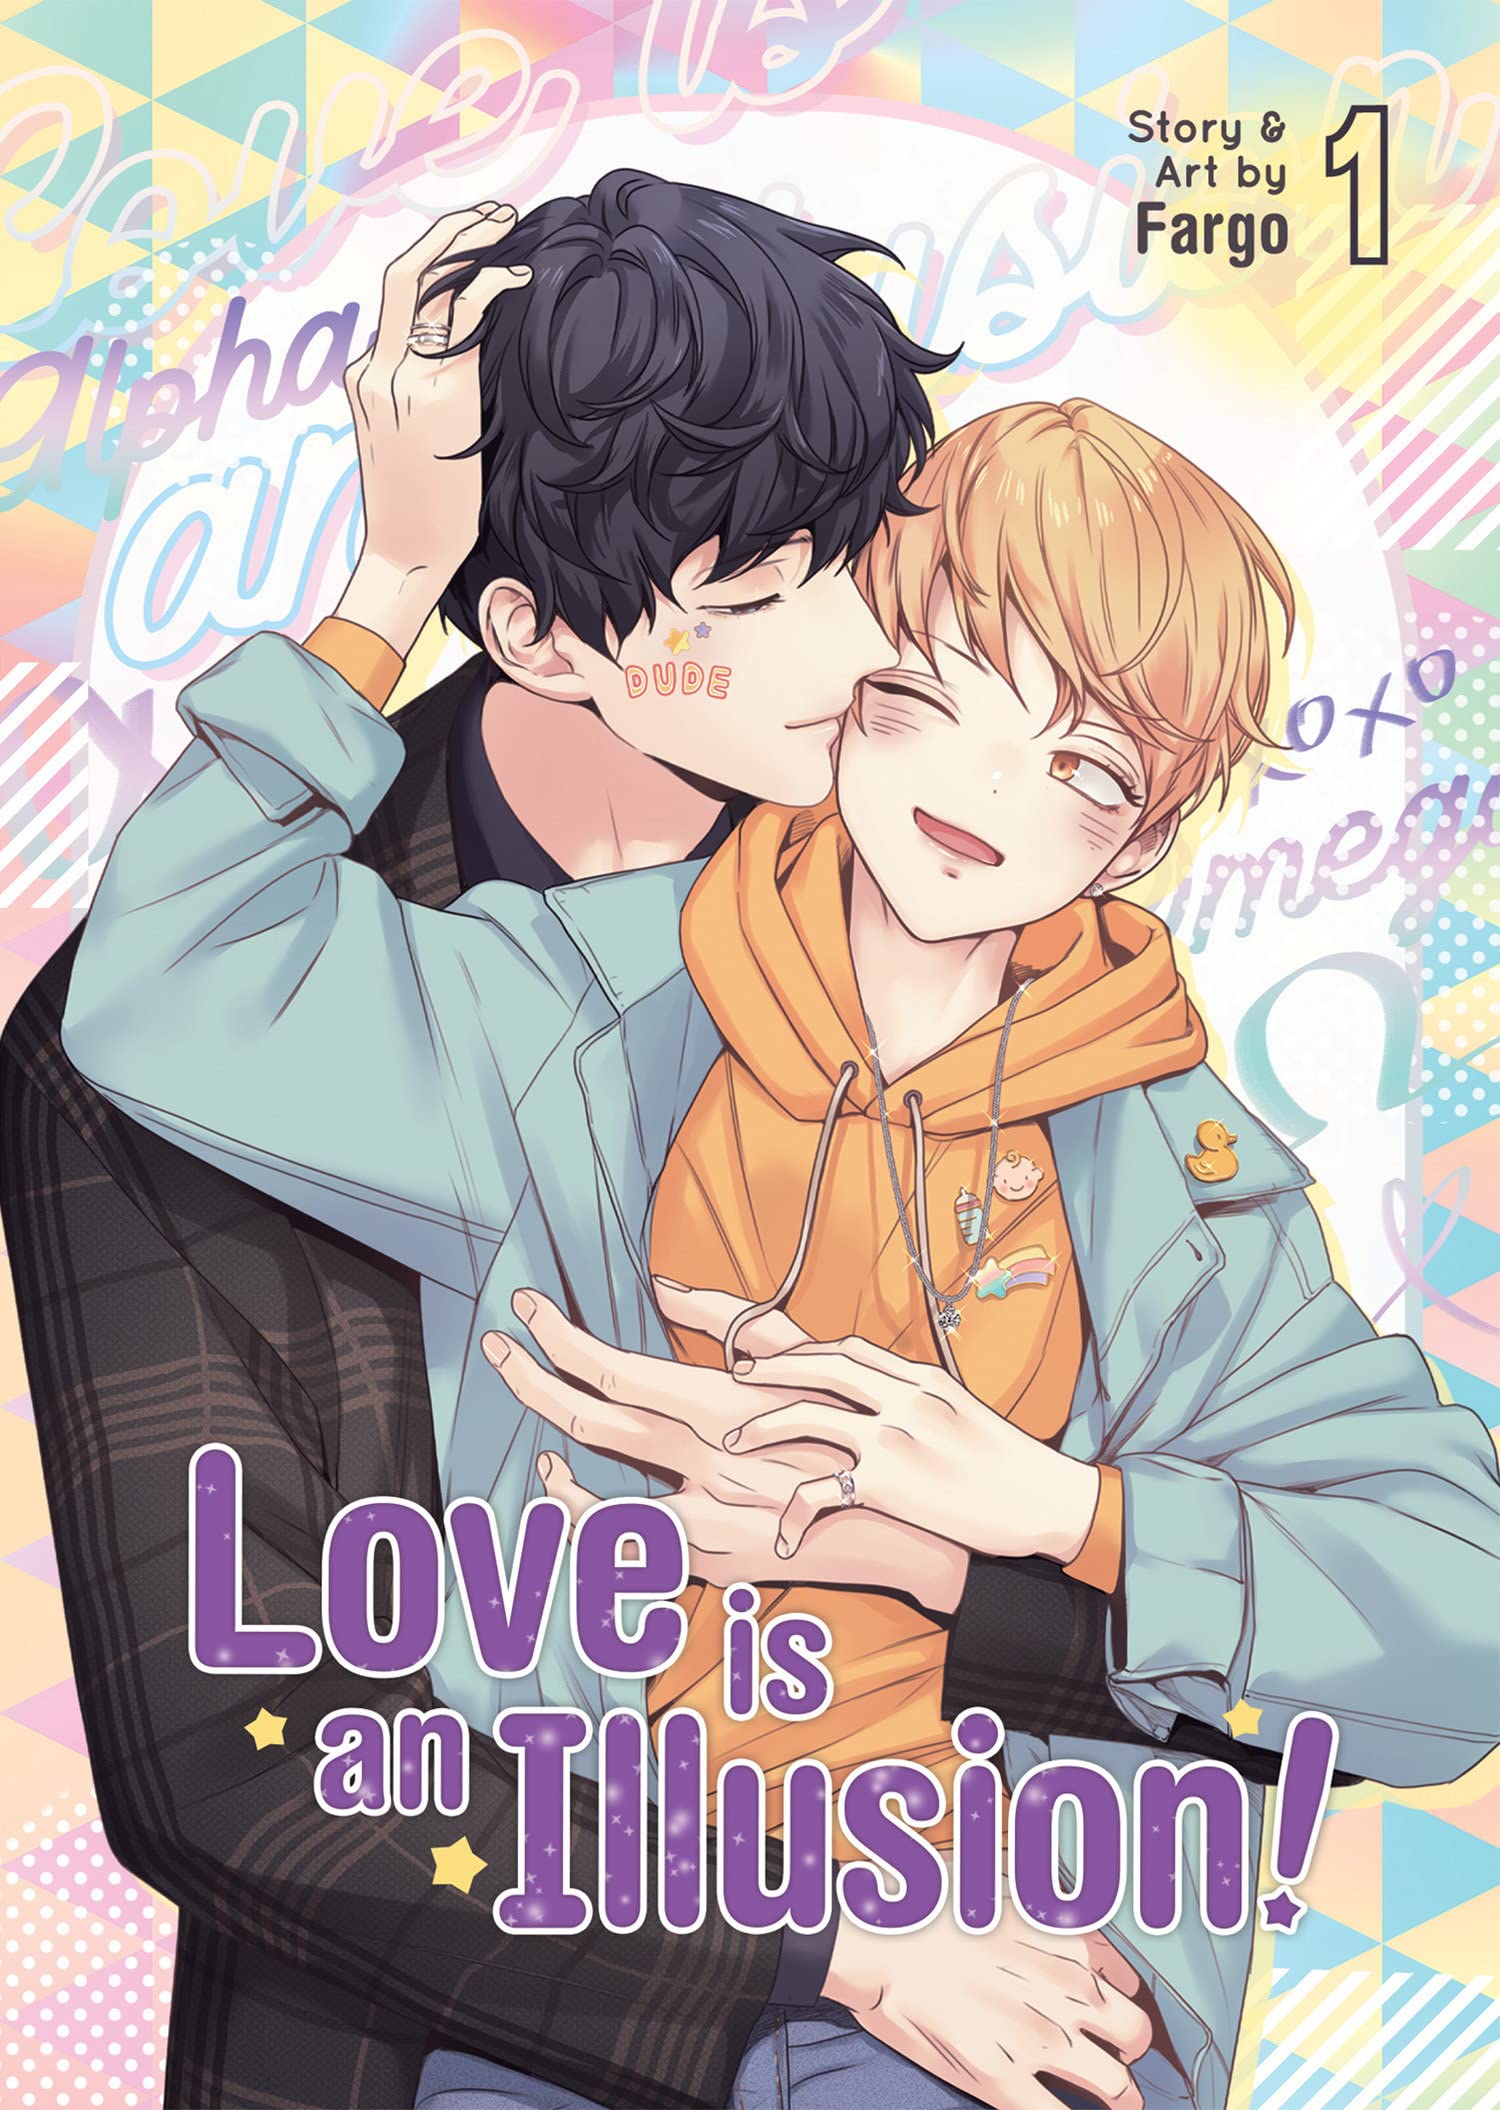 Love In Orbit Manga Ch 1 Love Is An Illusion!: Volume 1 from Love Is An Illusion! by Fargo published  by Seven Seas @ ForbiddenPlanet.com - UK and Worldwide Cult Entertainment  Megastore